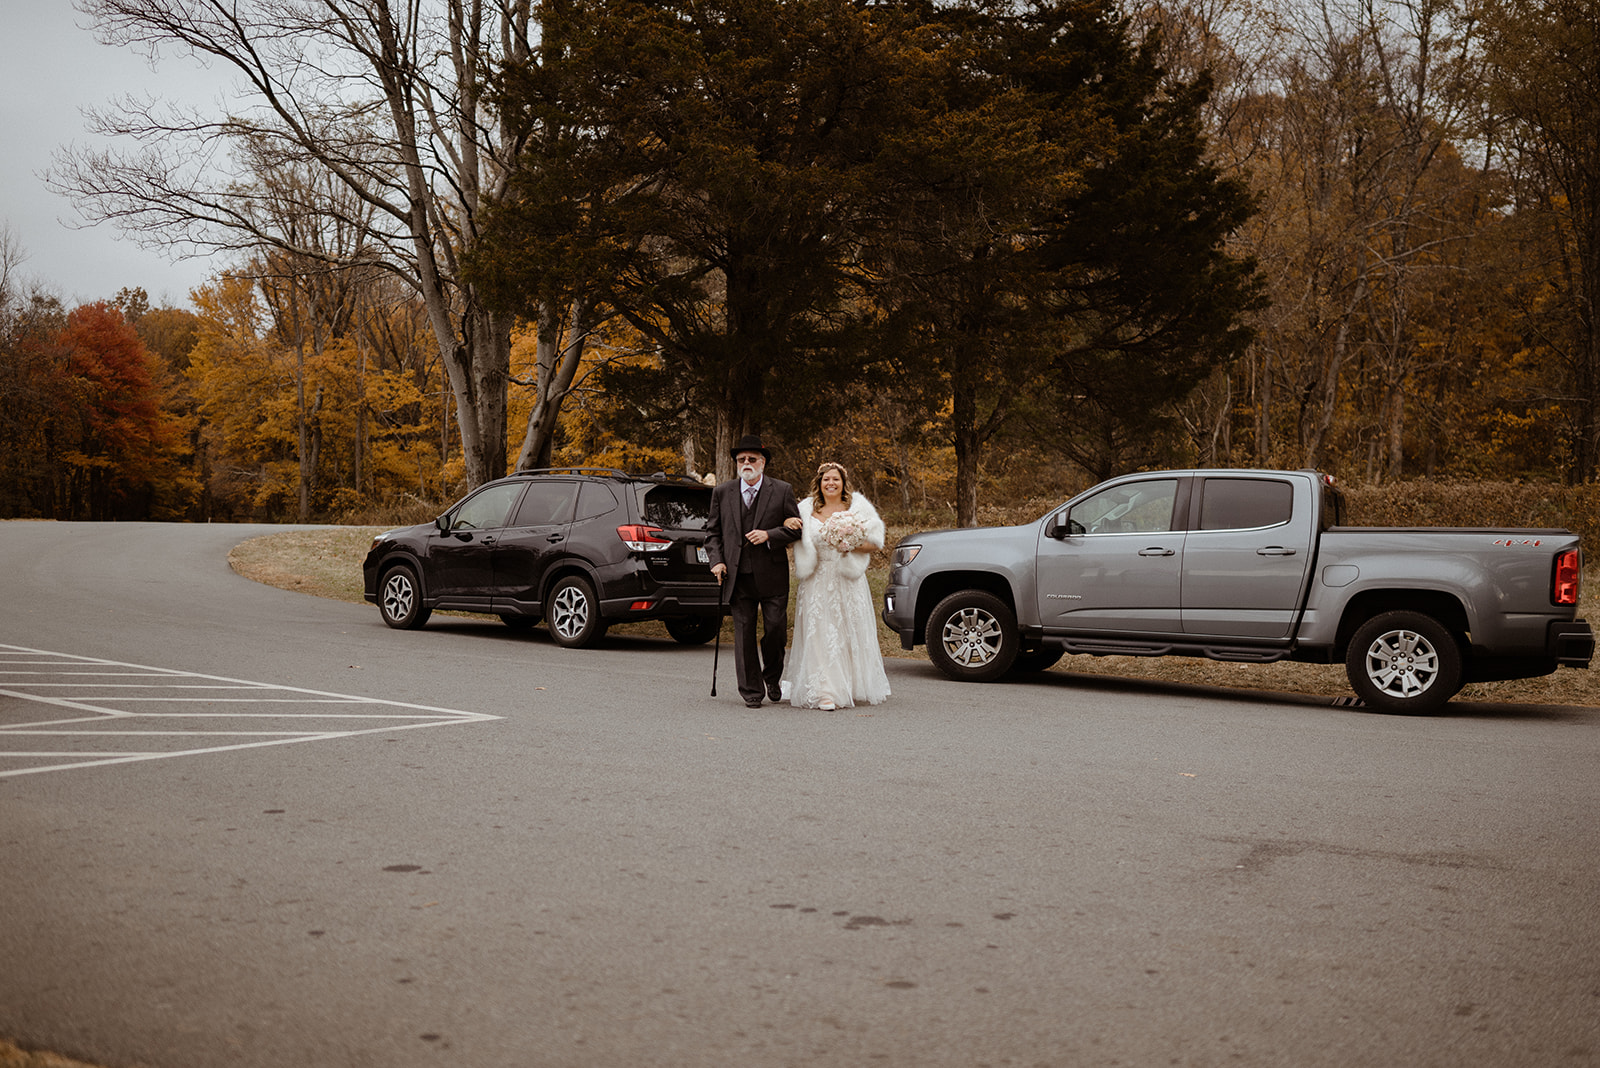 Ideas for a Jewish elopement in the mountains - Elopement with family in Shenandoah National Park, Blue Ridge Mountains